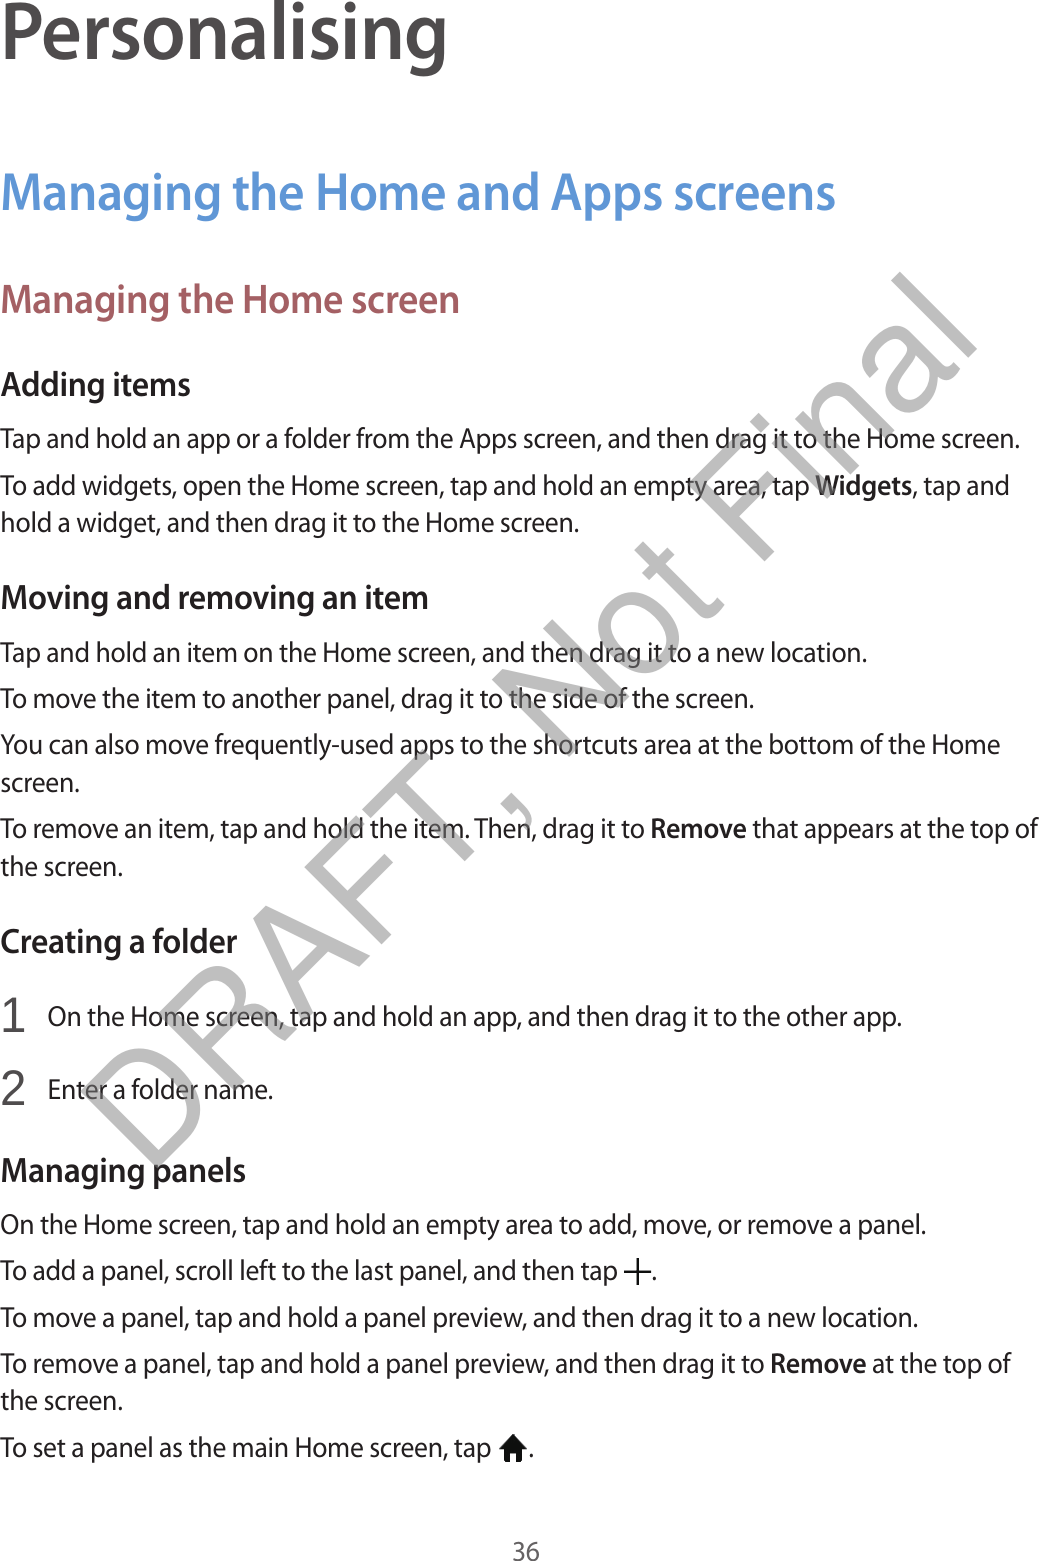 36PersonalisingManaging the Home and Apps screensManaging the Home screenAdding itemsTap and hold an app or a folder from the Apps screen, and then drag it to the Home screen.To add widgets, open the Home screen, tap and hold an empty area, tap Widgets, tap and hold a widget, and then drag it to the Home screen.Moving and removing an itemTap and hold an item on the Home screen, and then drag it to a new location.To move the item to another panel, drag it to the side of the screen.You can also move frequently-used apps to the shortcuts area at the bottom of the Home screen.To remove an item, tap and hold the item. Then, drag it to Remove that appears at the top of the screen.Creating a folder1  On the Home screen, tap and hold an app, and then drag it to the other app.2  Enter a folder name.Managing panelsOn the Home screen, tap and hold an empty area to add, move, or remove a panel.To add a panel, scroll left to the last panel, and then tap  .To move a panel, tap and hold a panel preview, and then drag it to a new location.To remove a panel, tap and hold a panel preview, and then drag it to Remove at the top of the screen.To set a panel as the main Home screen, tap  .DRAFT, Not Final